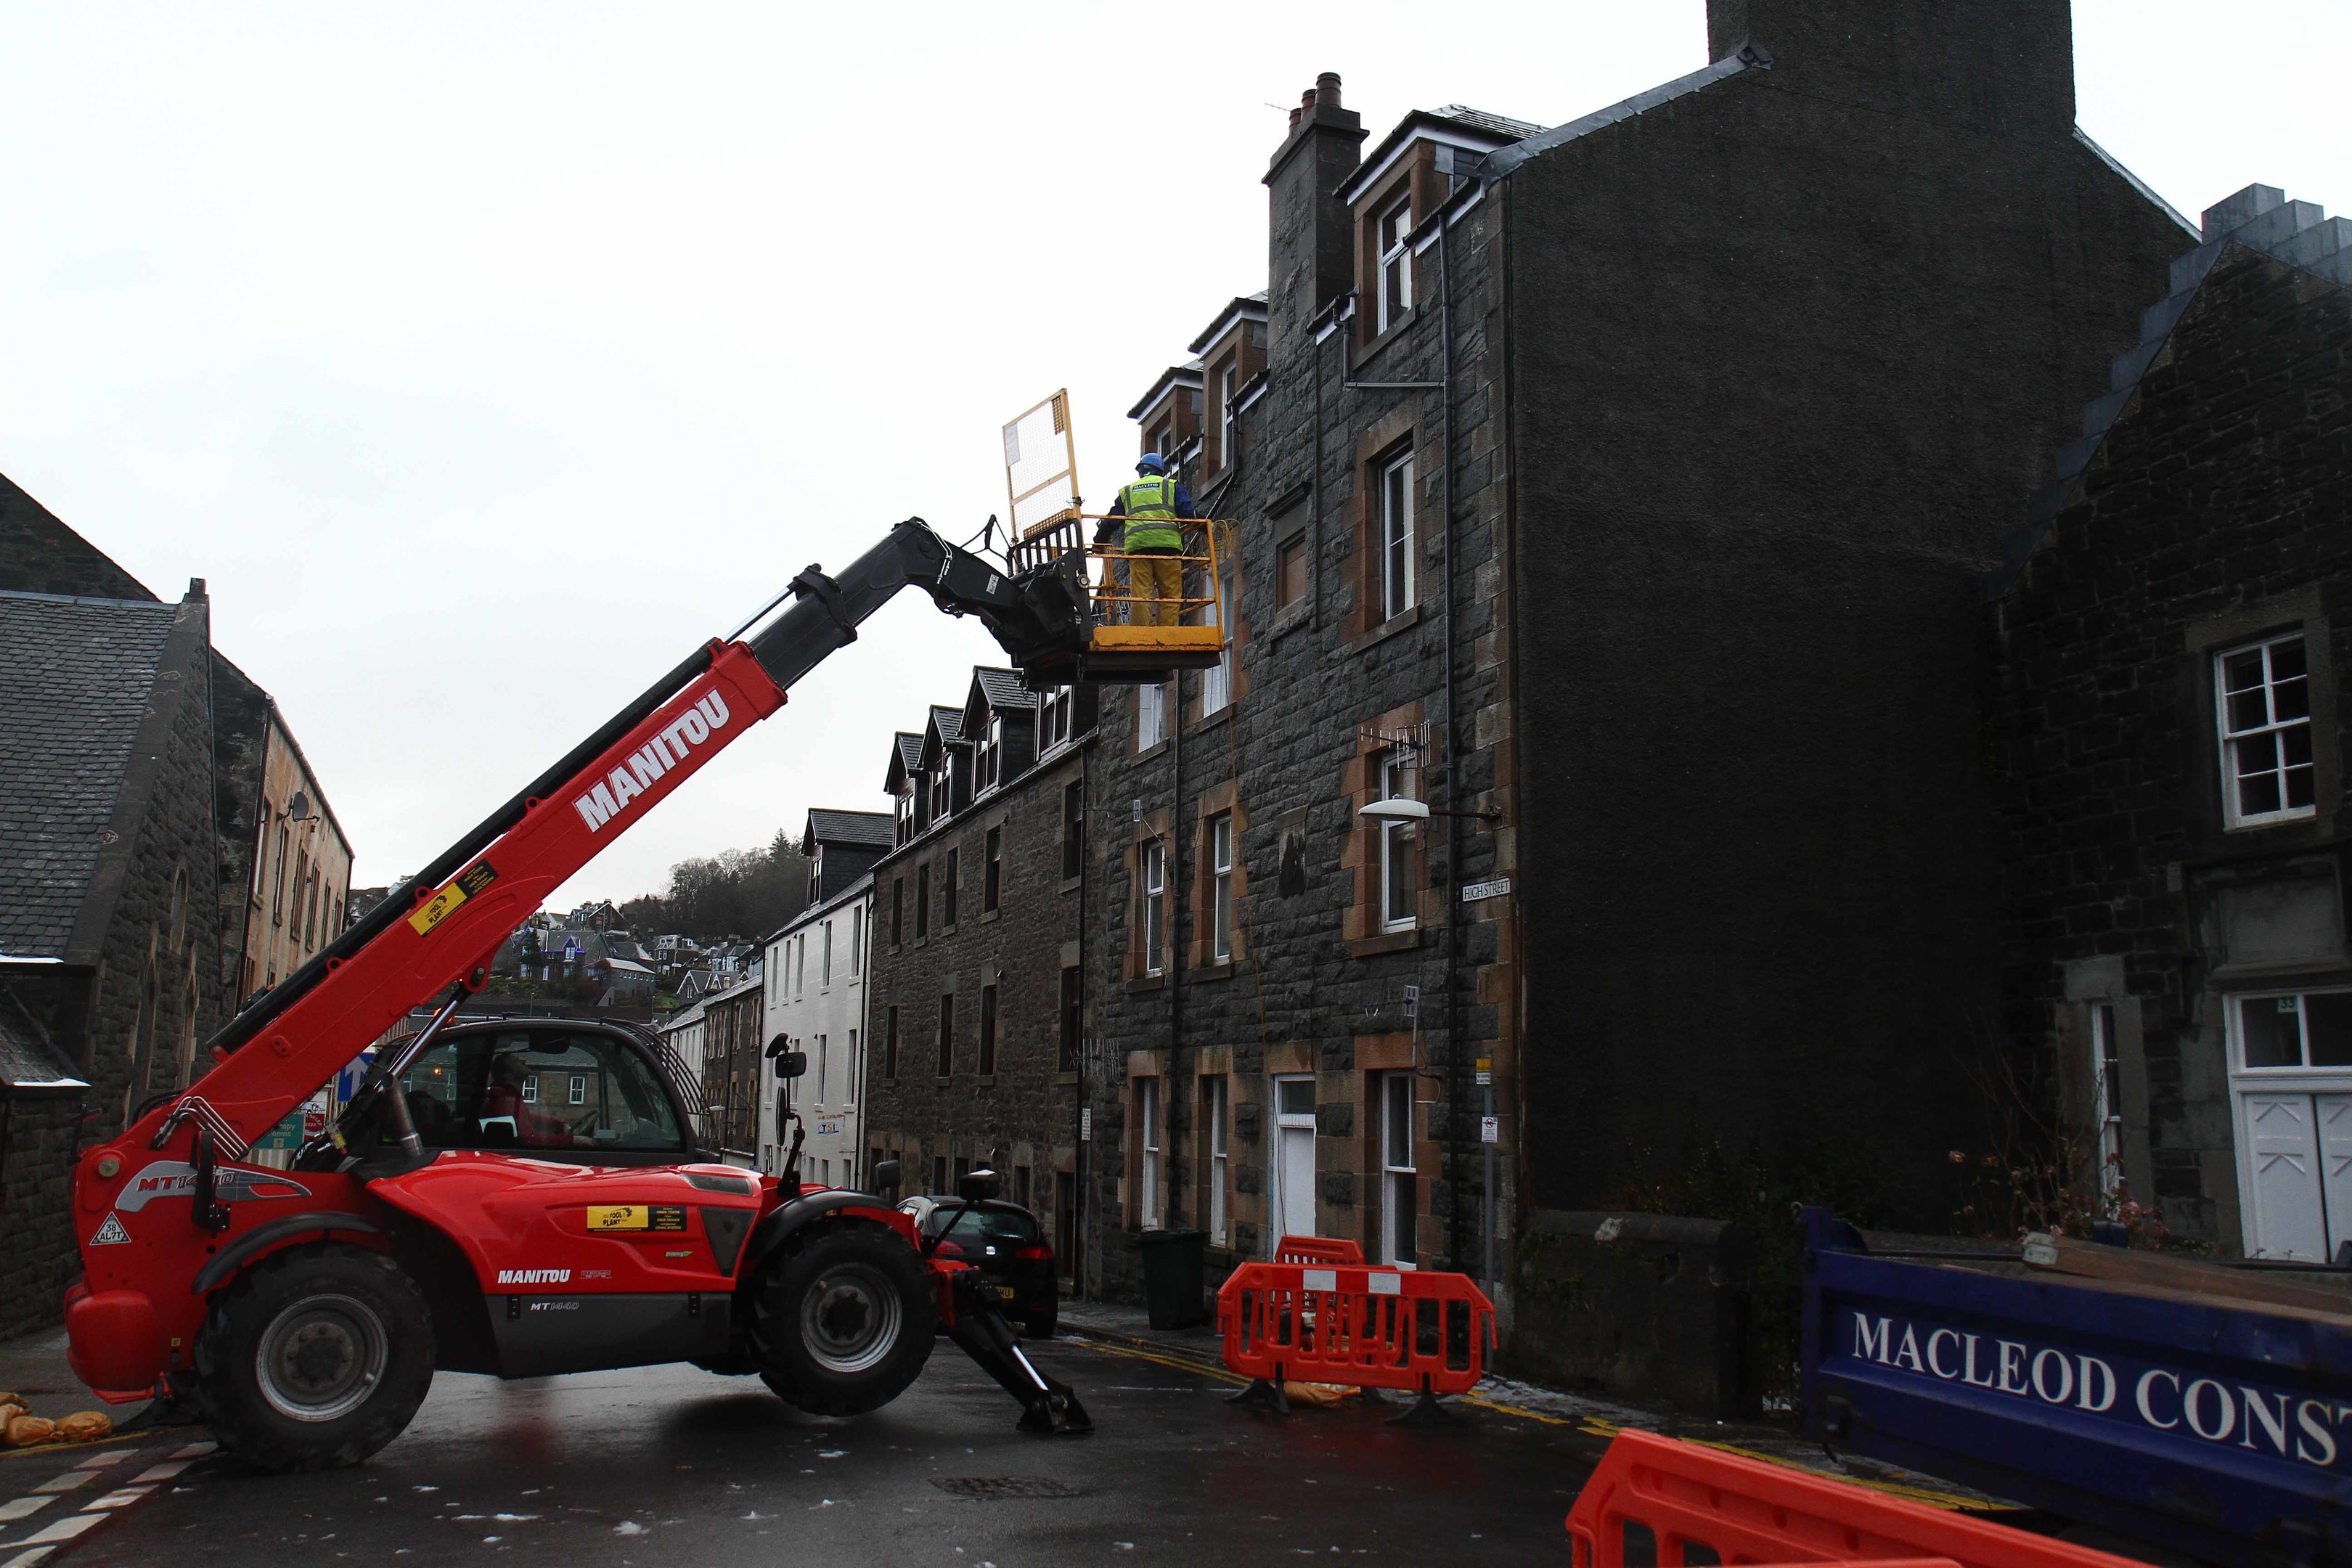 High Street in Oban has been closed off for pedestrian safety. Picture by Kevin Mcglynn